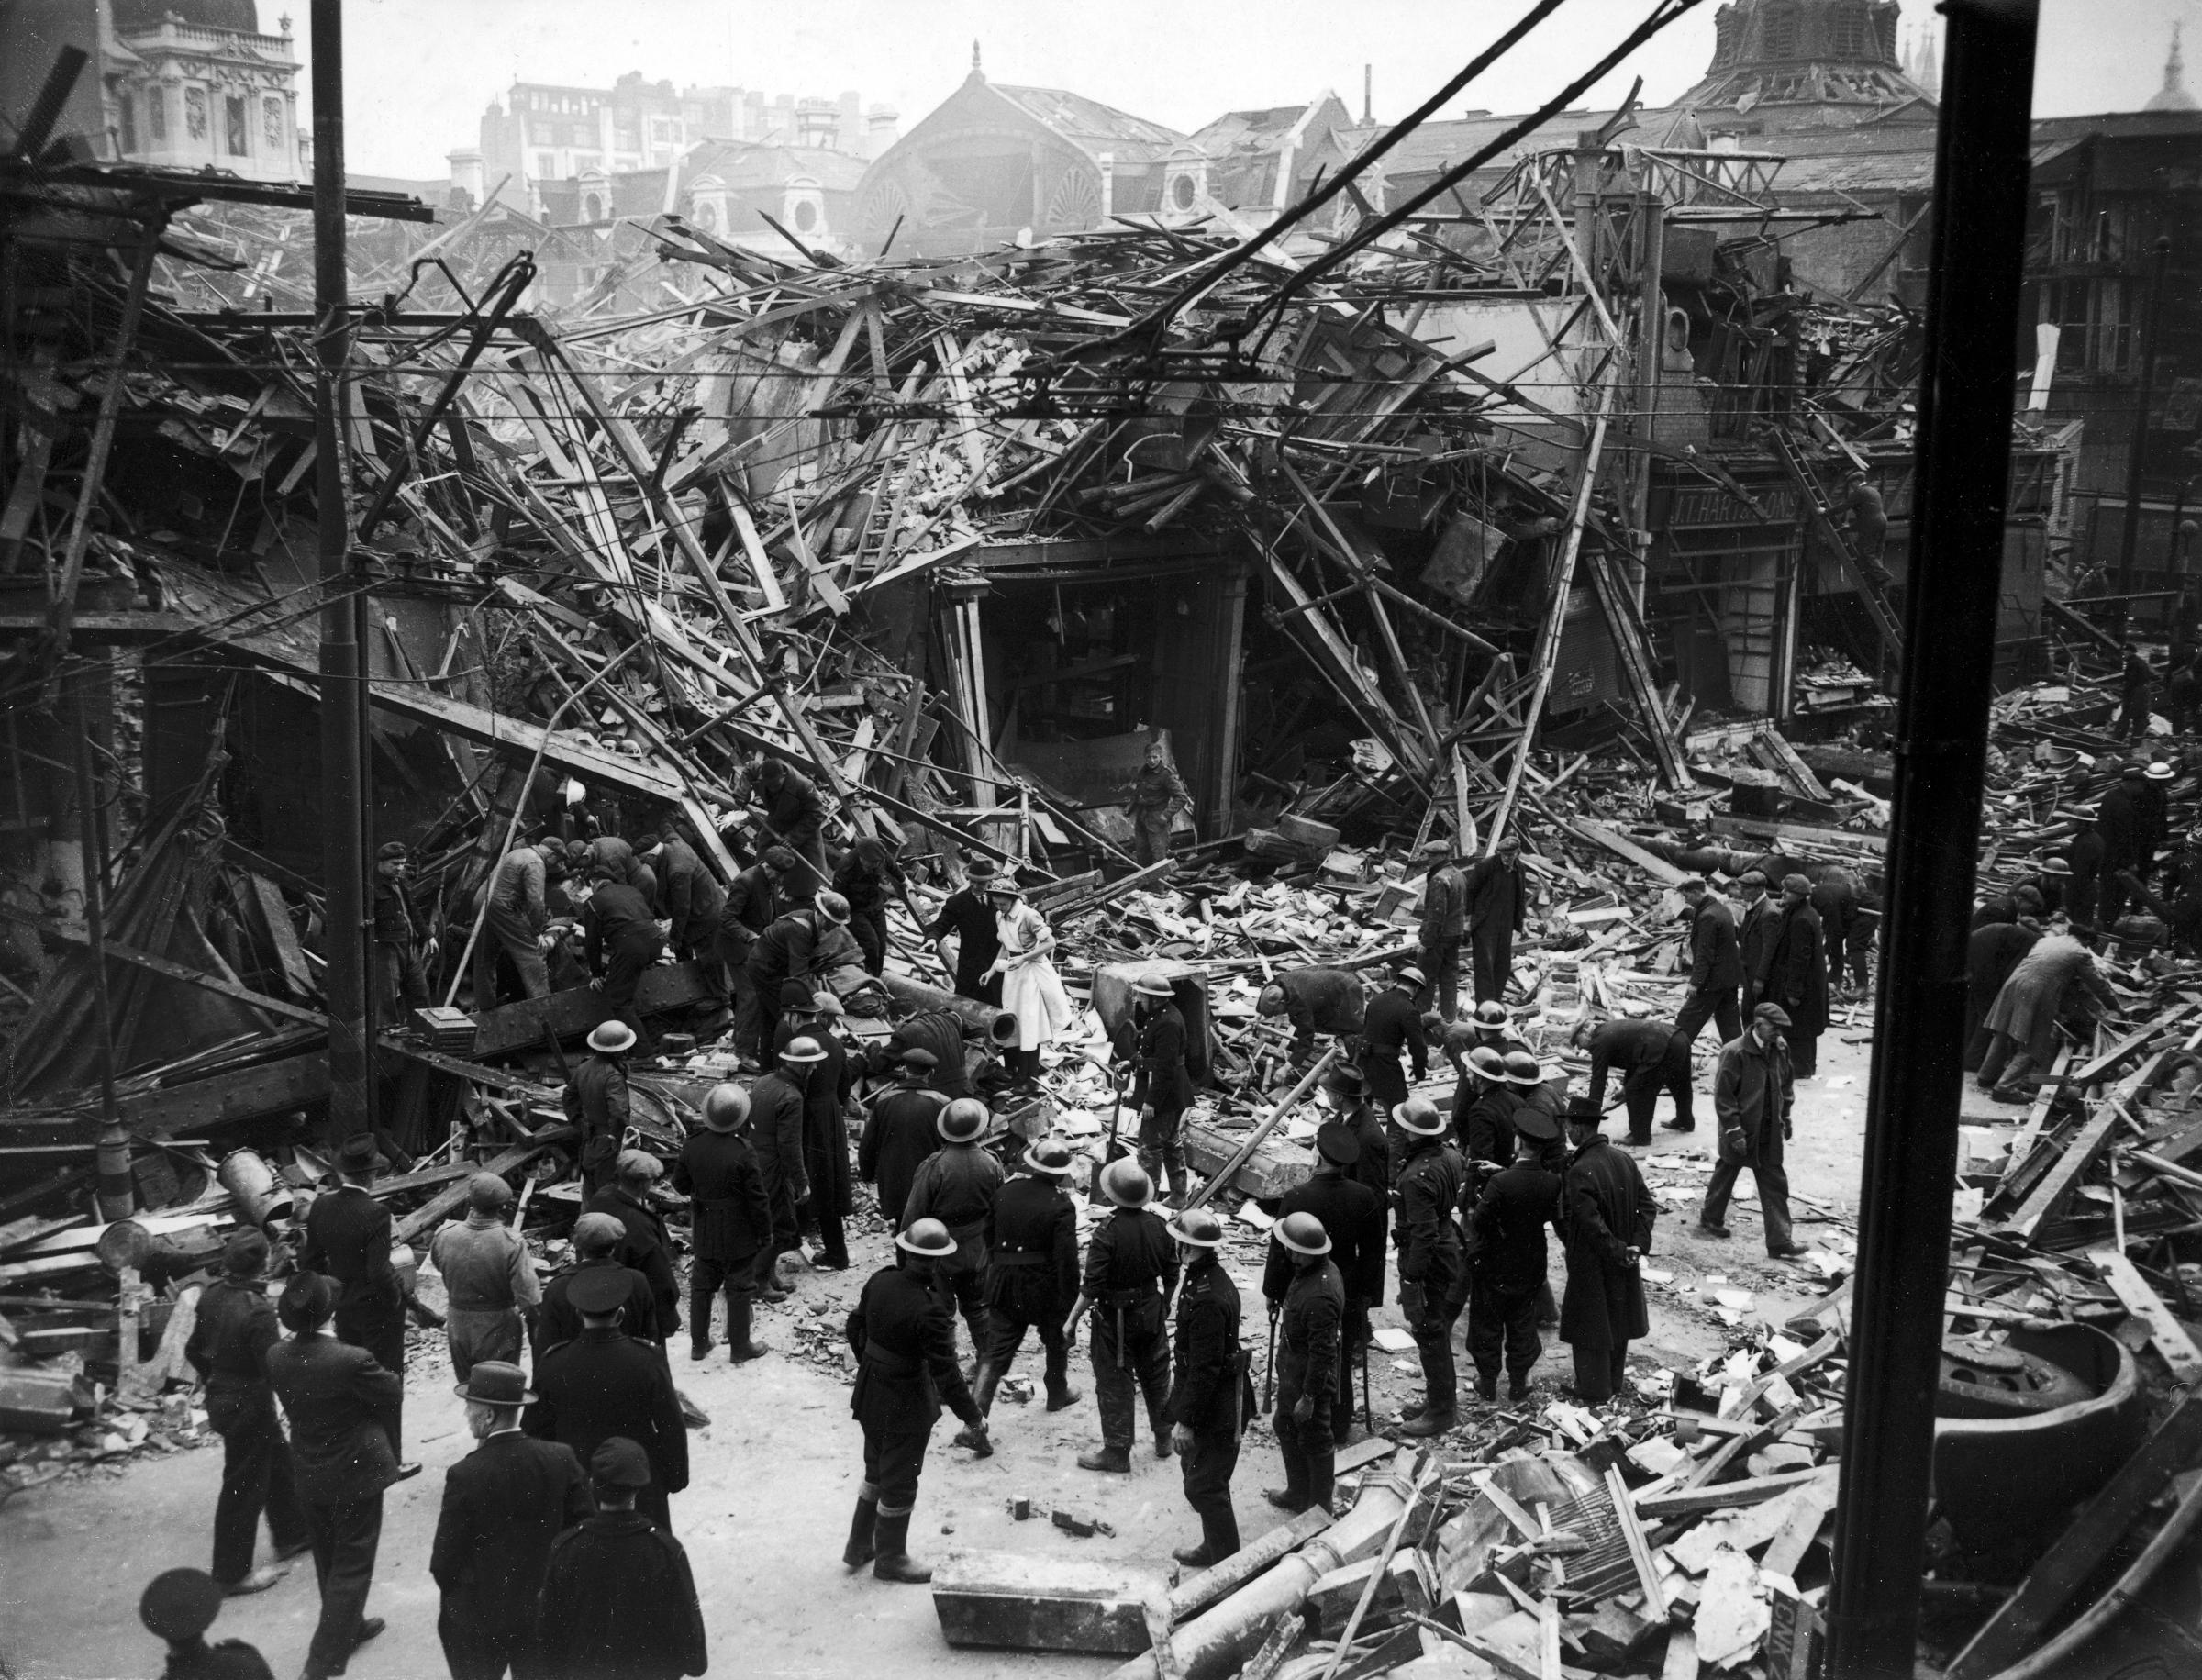 Rescue workers help pull victims from ruins of a building hit by a German V-1 "flying bomb," July 1944.